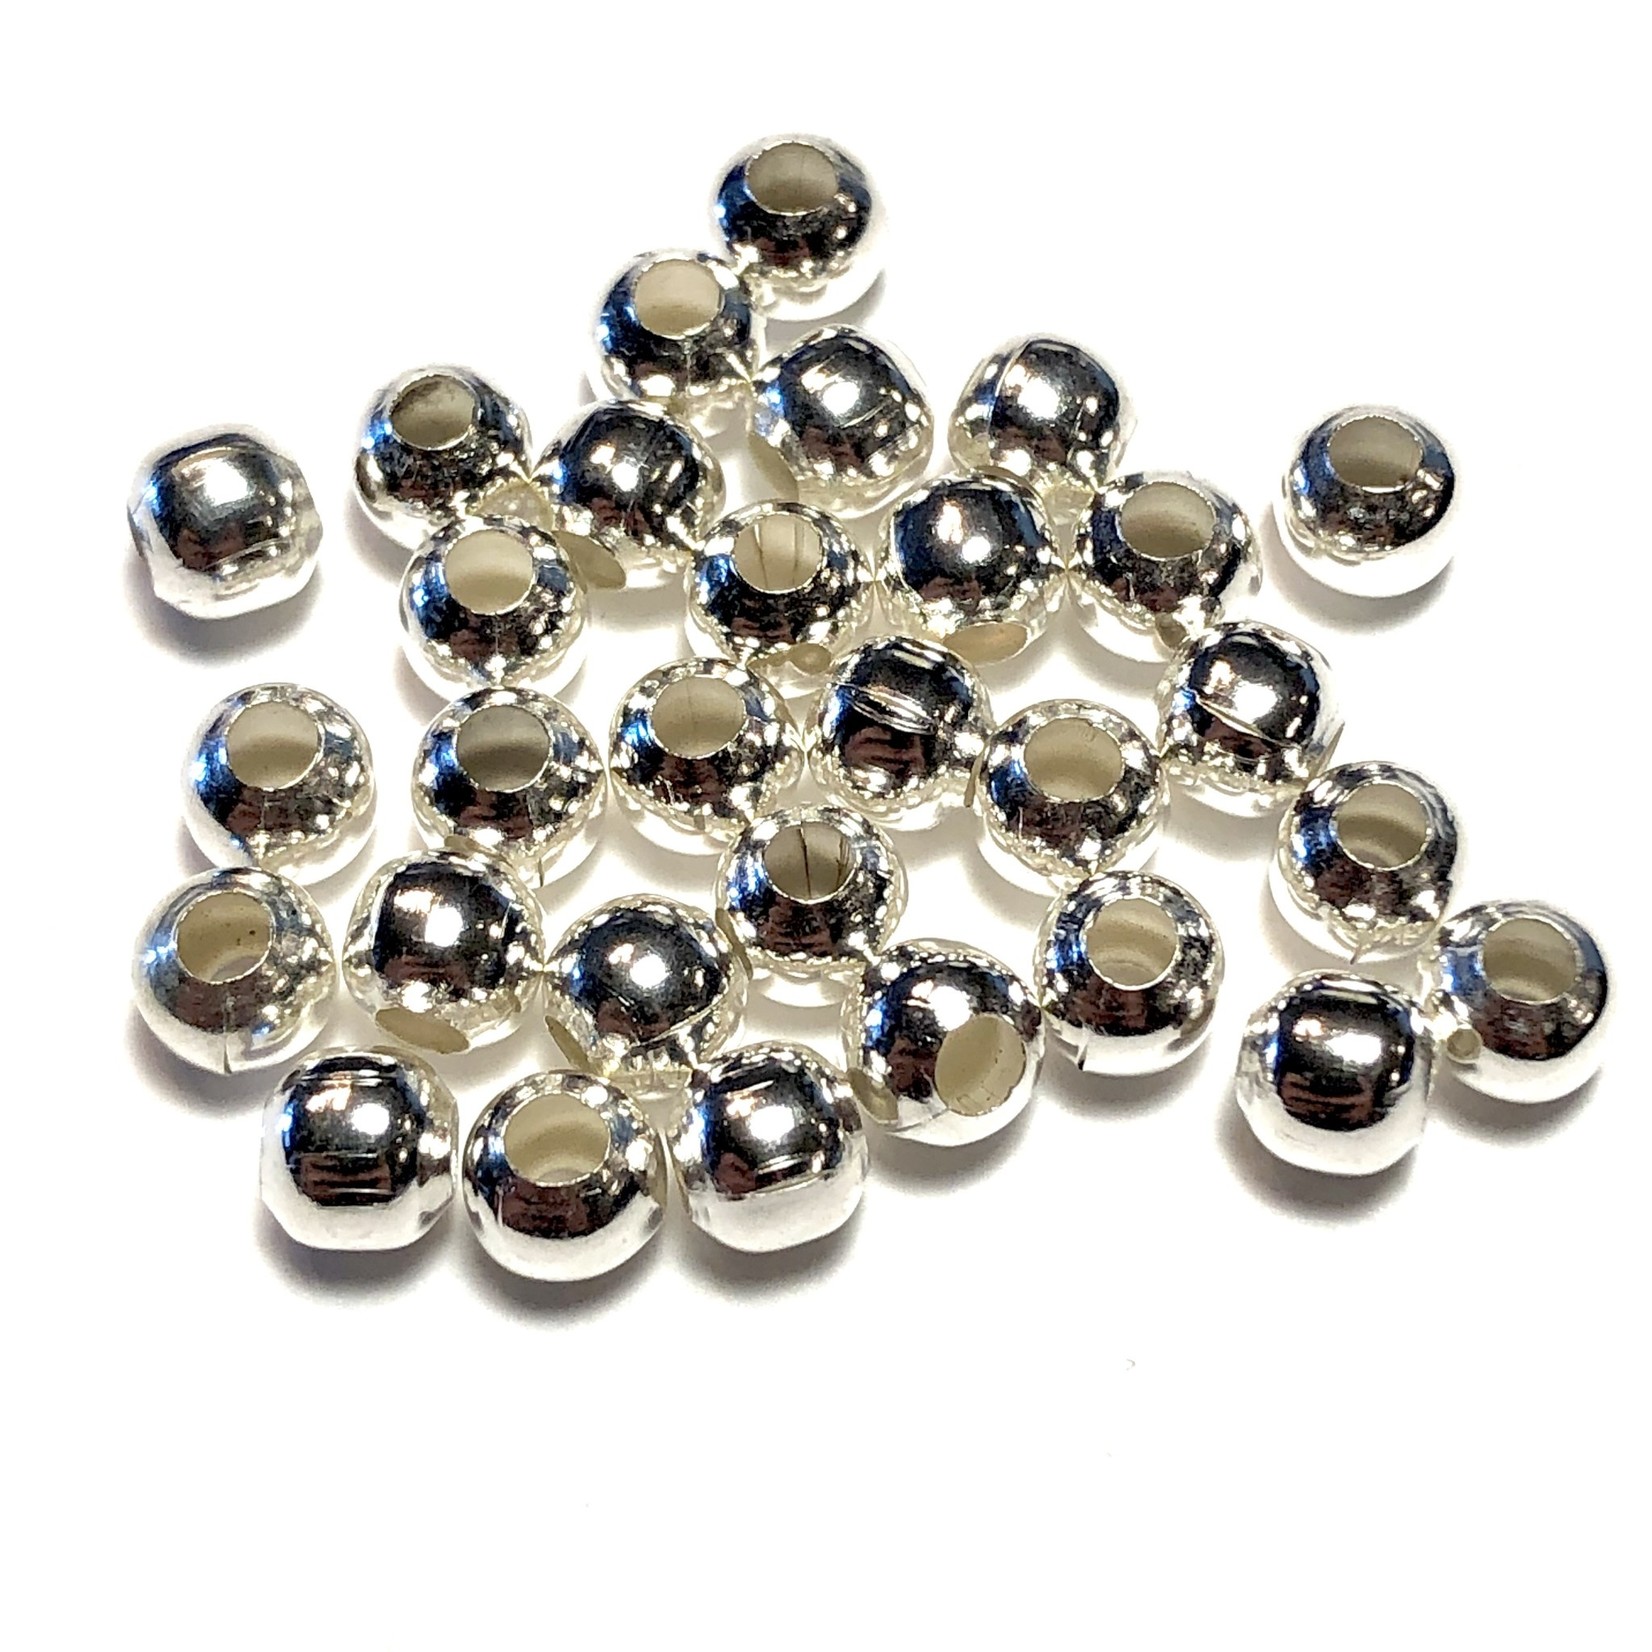 Silver Plated 6mm Round Spacer Bead 2.5mm Hole 100pcs